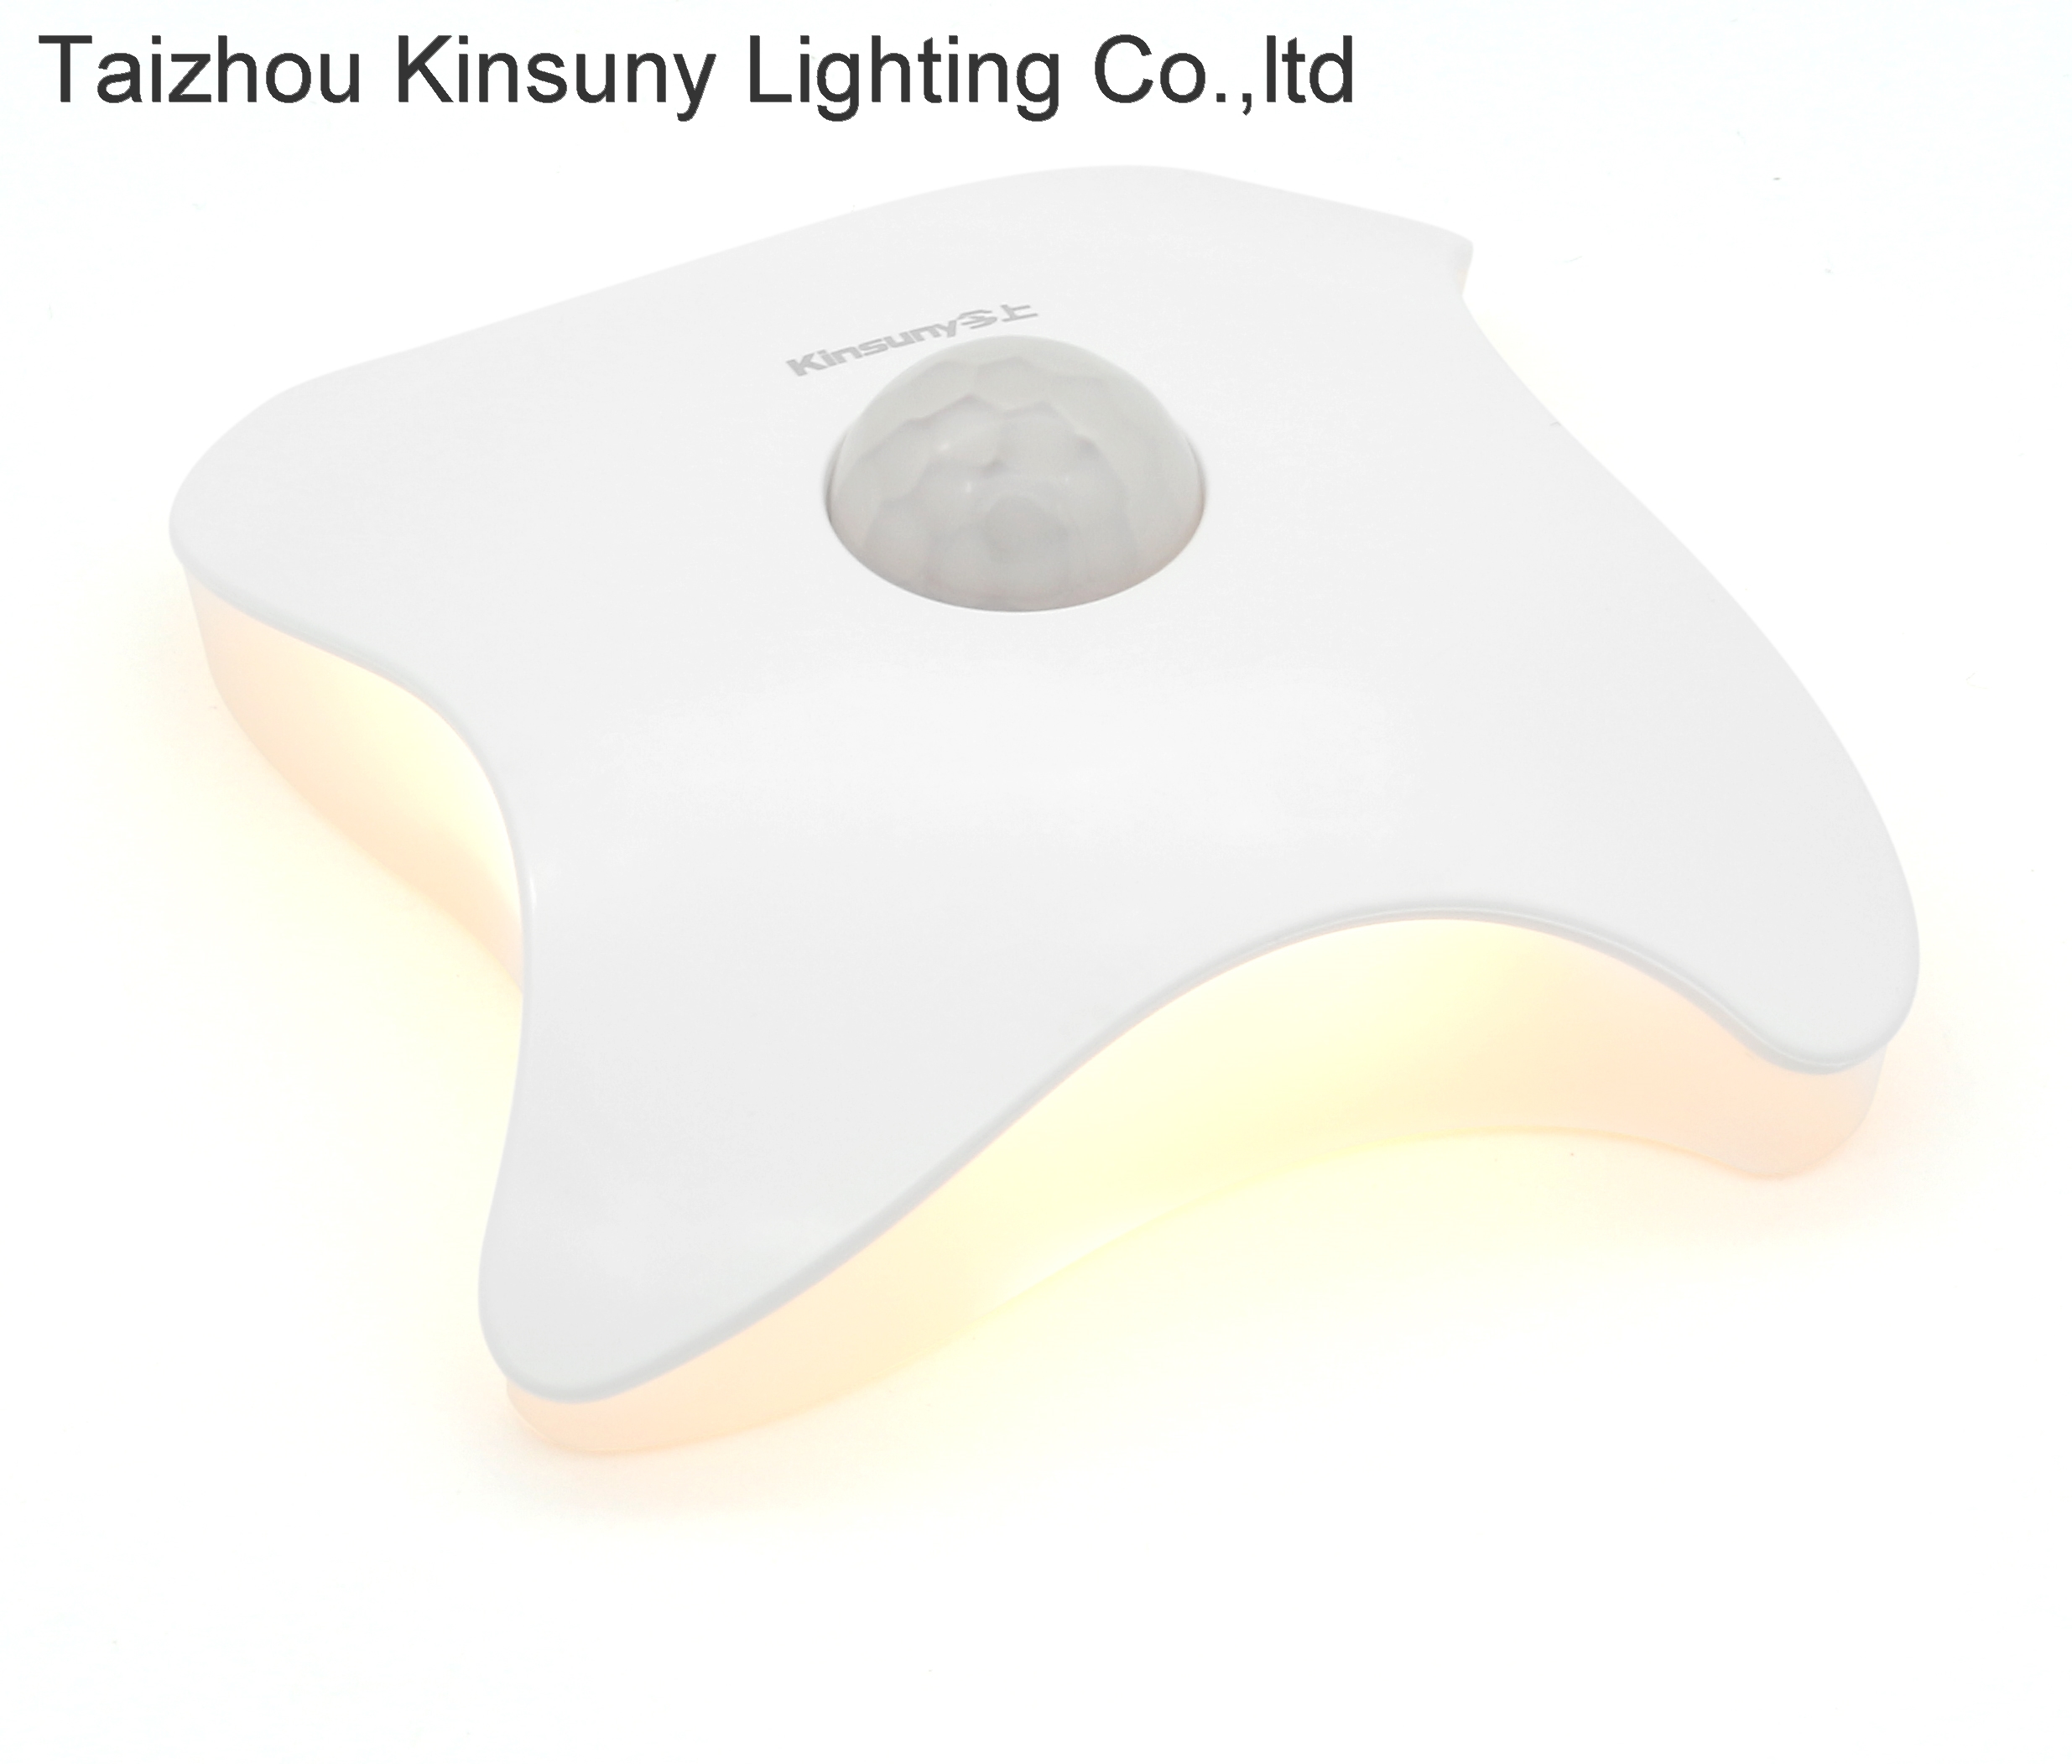 Motion Sensor LED Night Light with built-in battery portable for bedroom baby room bathroom stairs